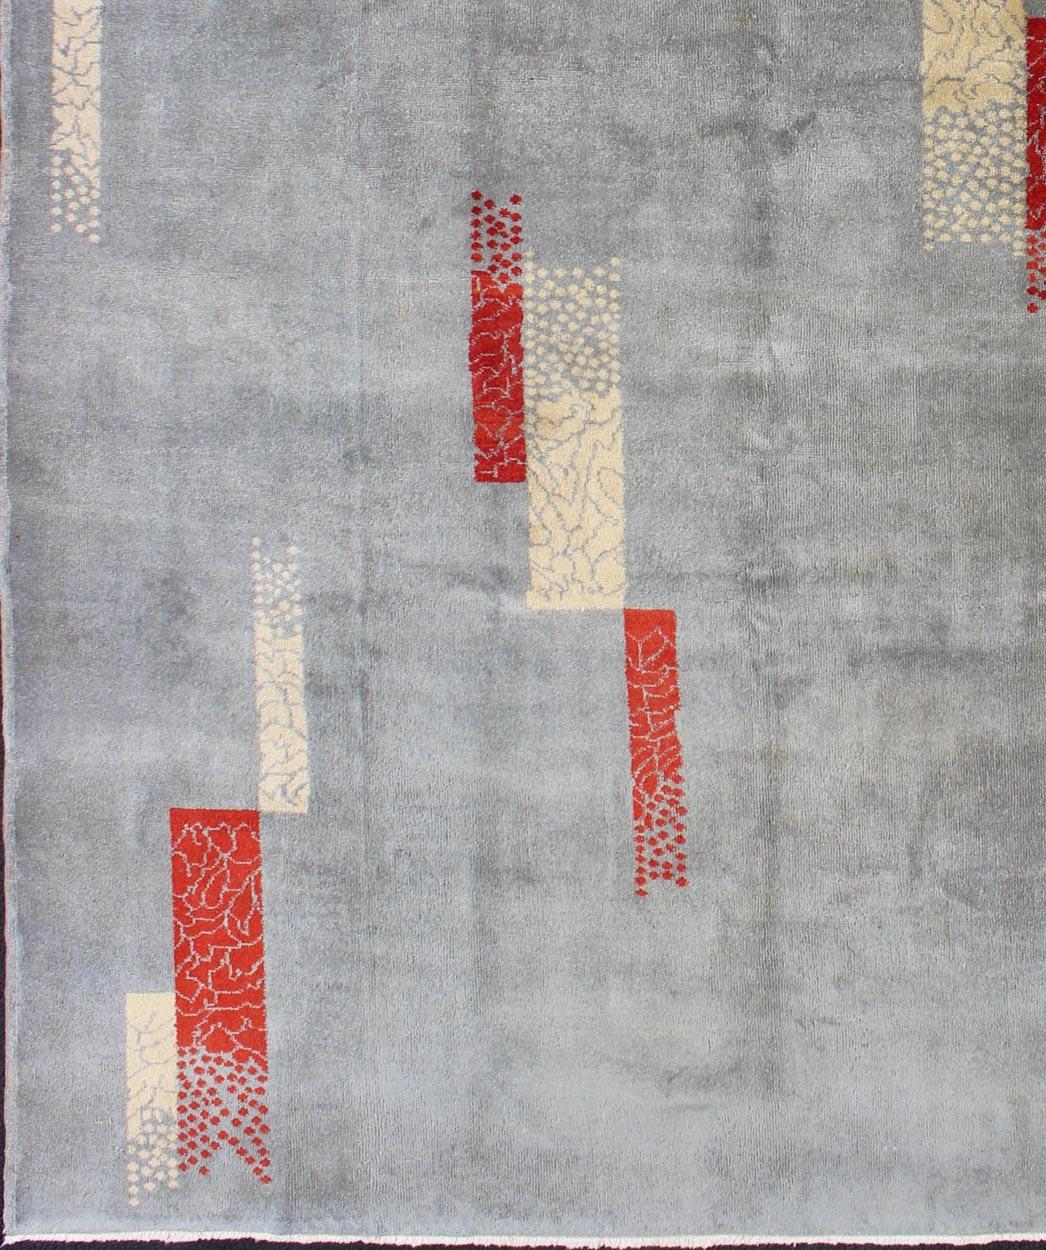 Rendered in box shapes with a spotted and speckled assortment of rich red and cream colors, this very unique Mid-Century Modern rug has an abstract design set on a pale gray-blue background making it a great fit for a variety of modern and